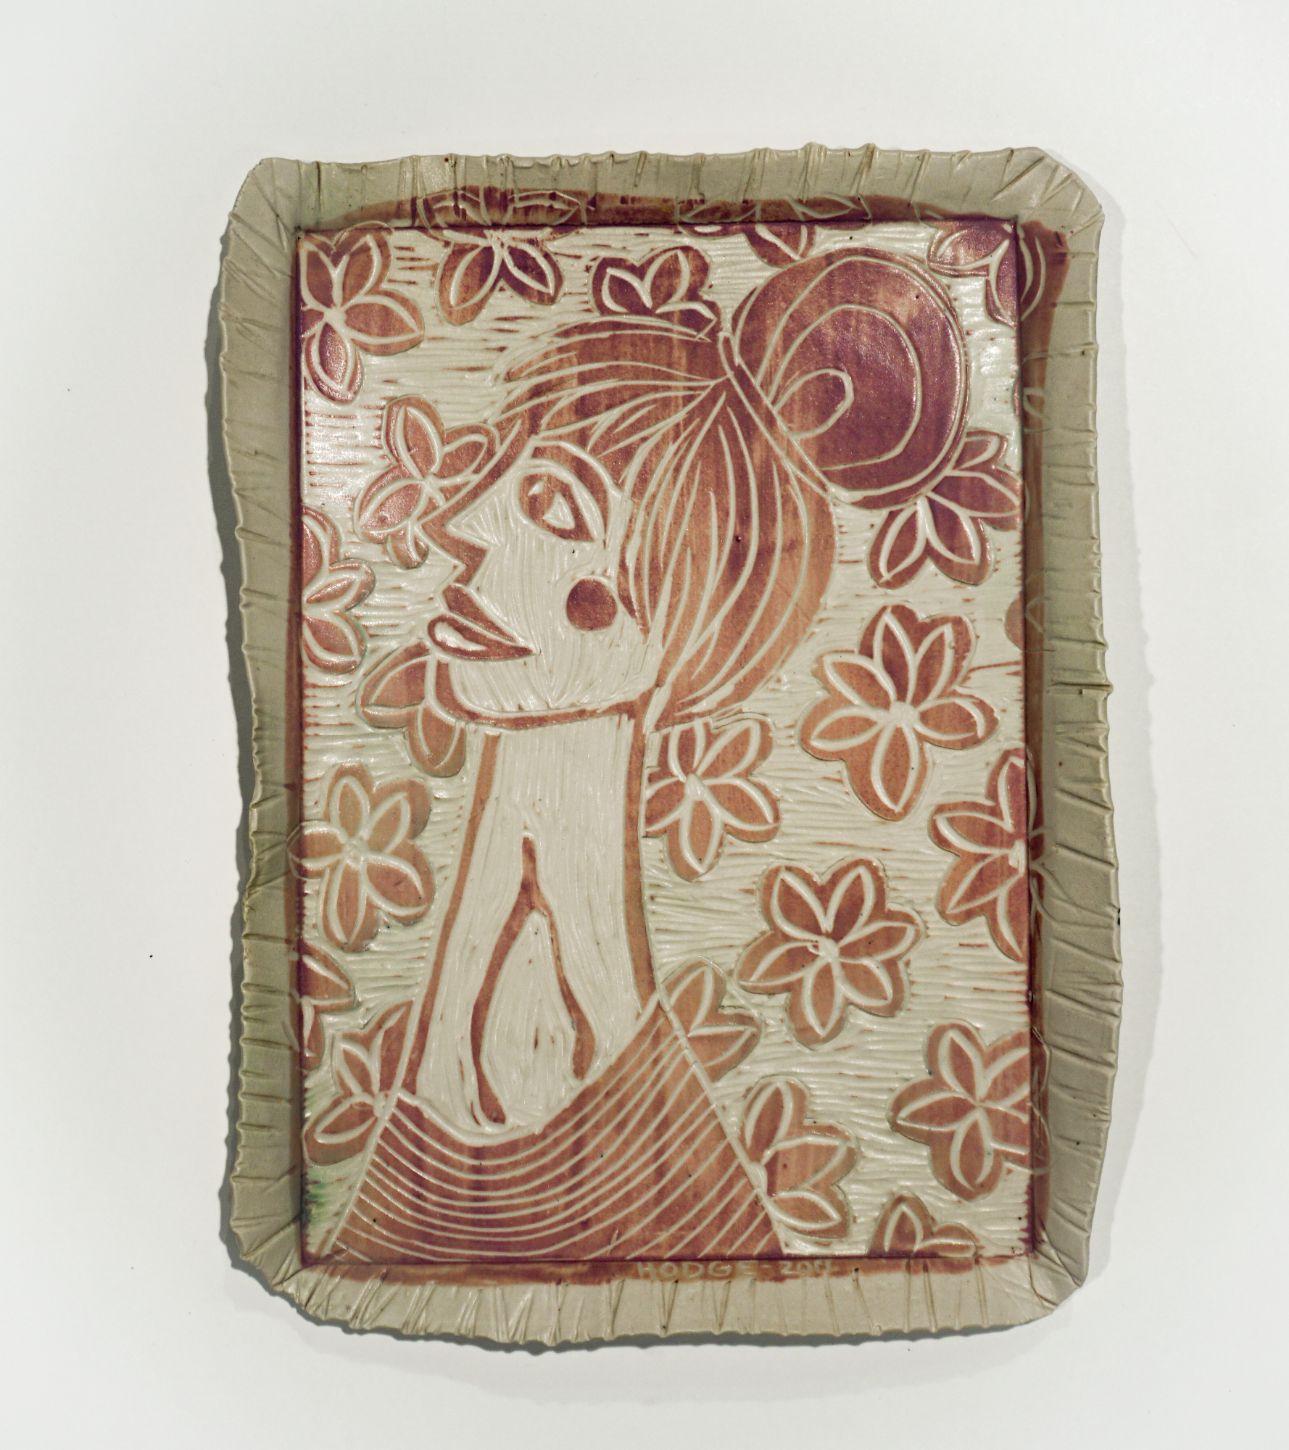 Modern Wishful Thinking Portrait. Carved Porcelain Wall Sculpture For Sale